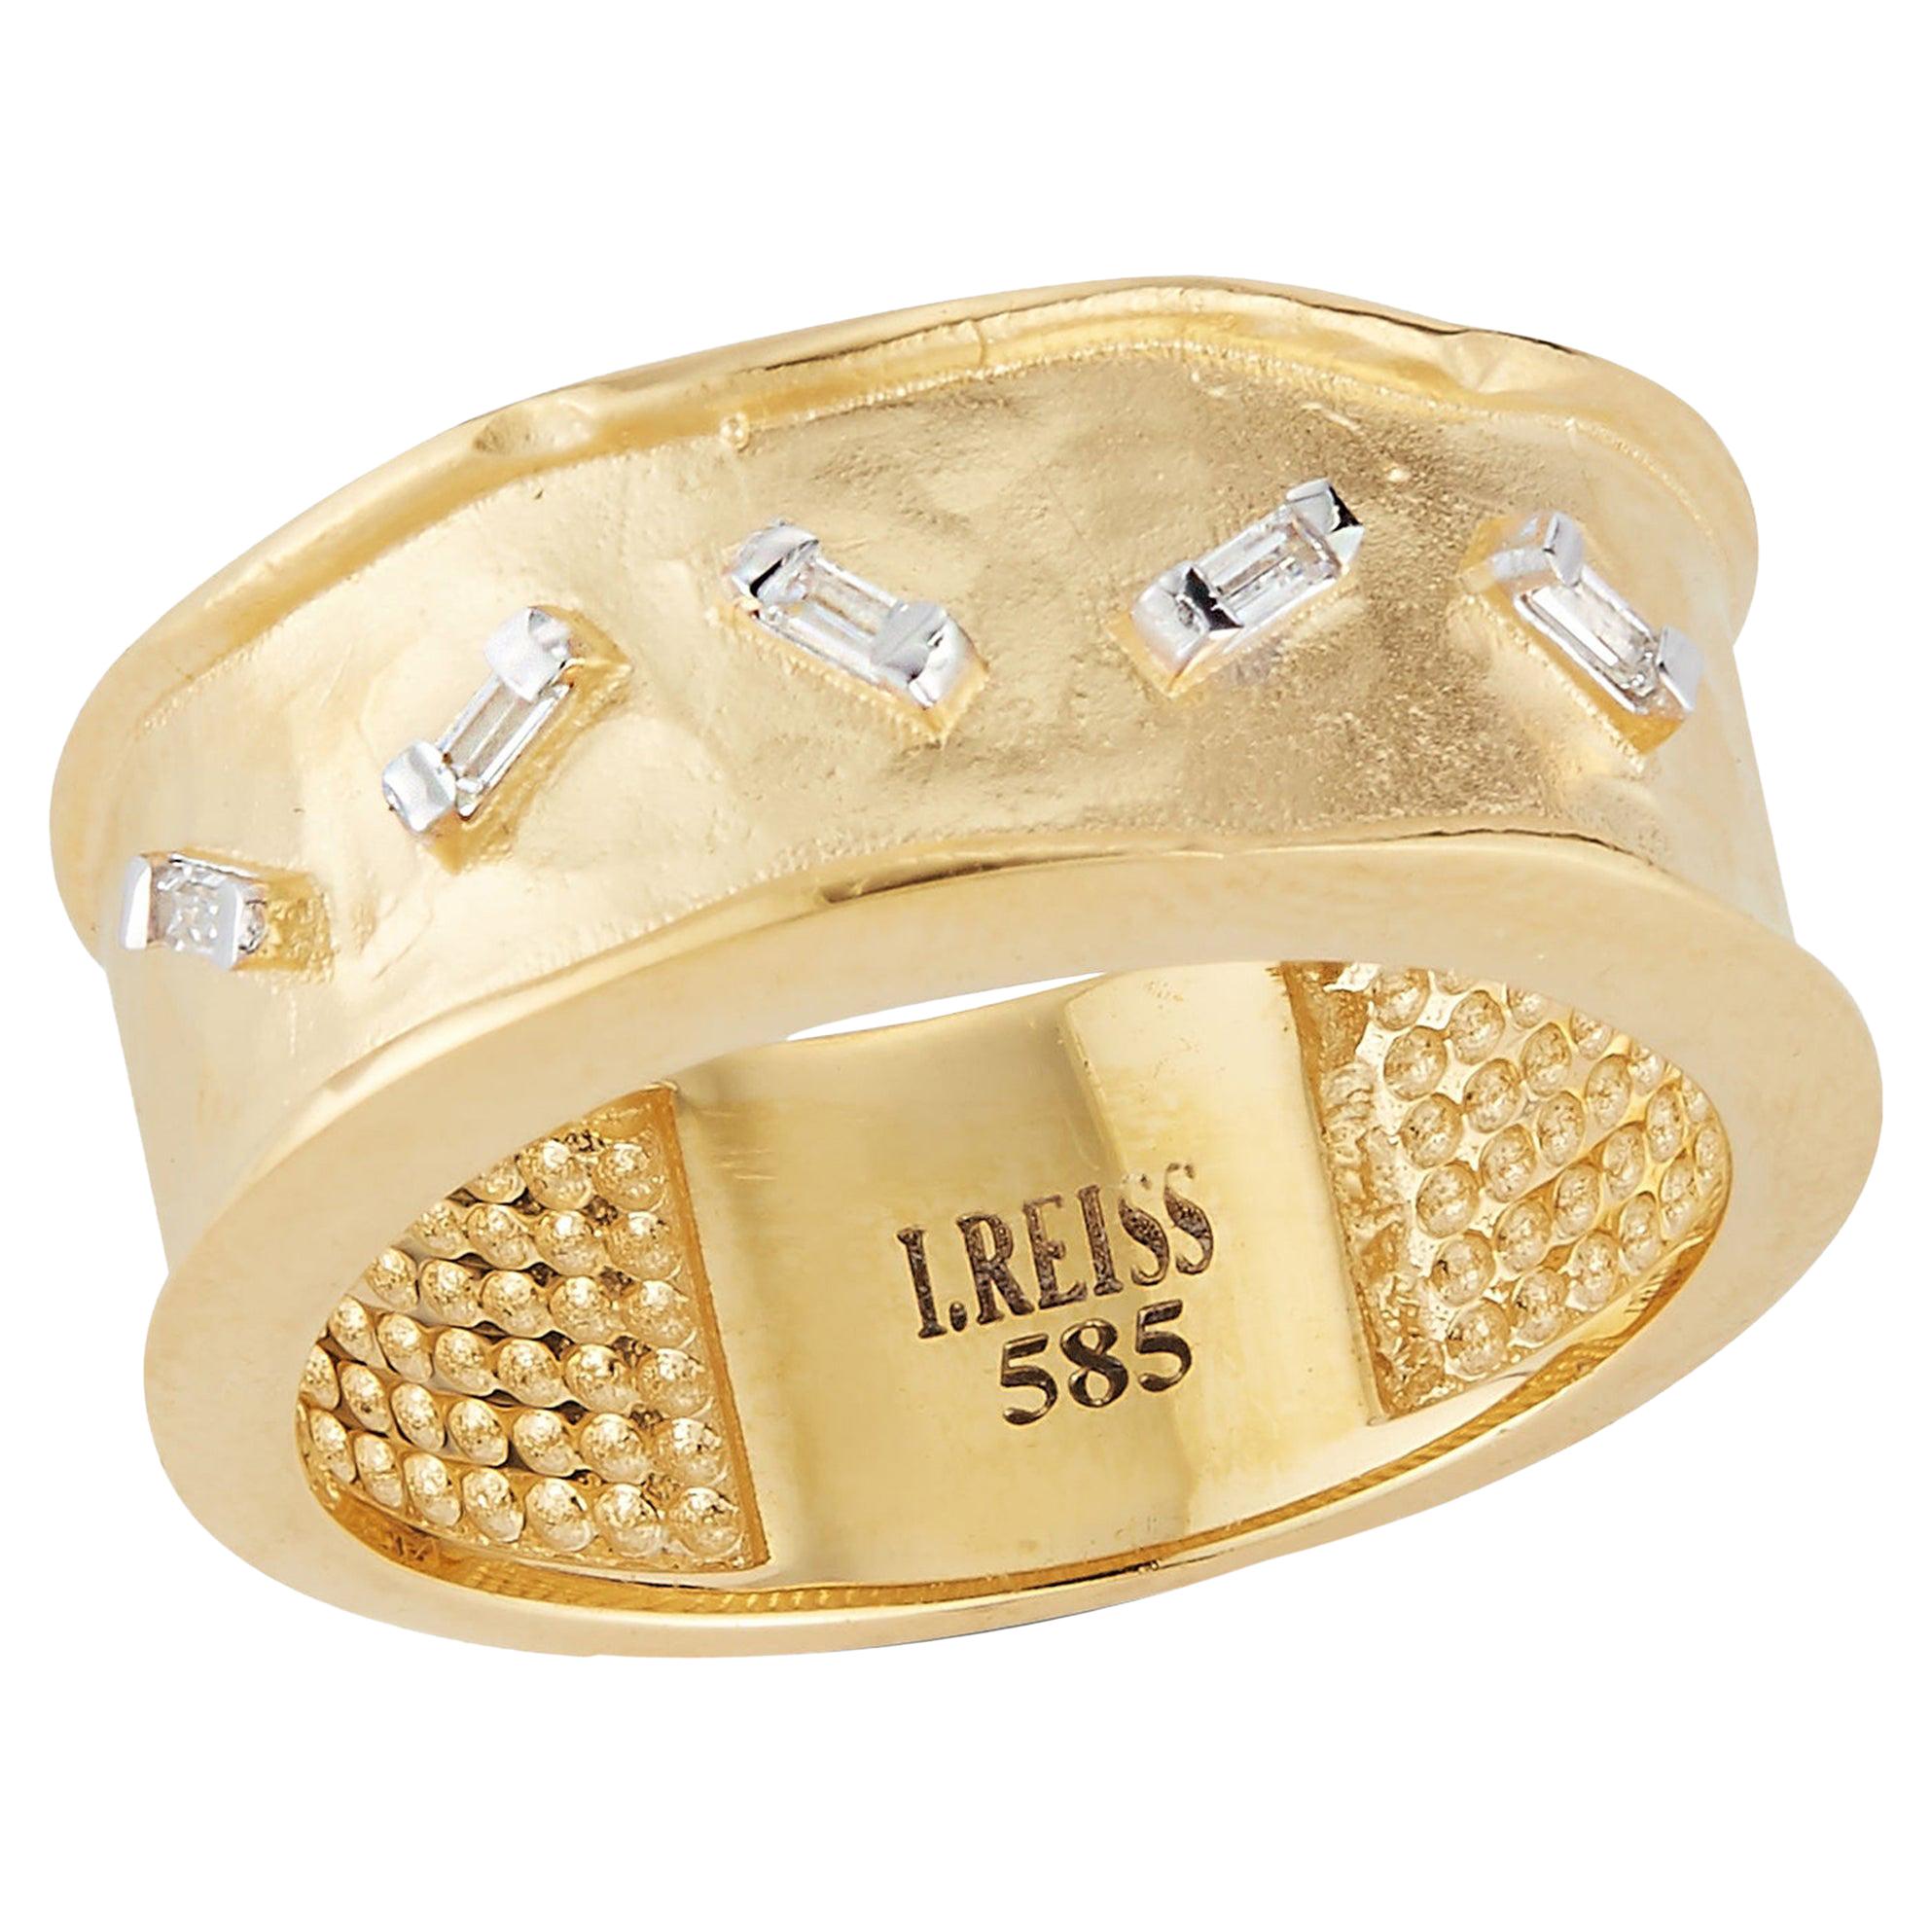 For Sale:  Handcrafted 14 Karat Yellow Gold Ring Set with Scattered Baguette Diamonds